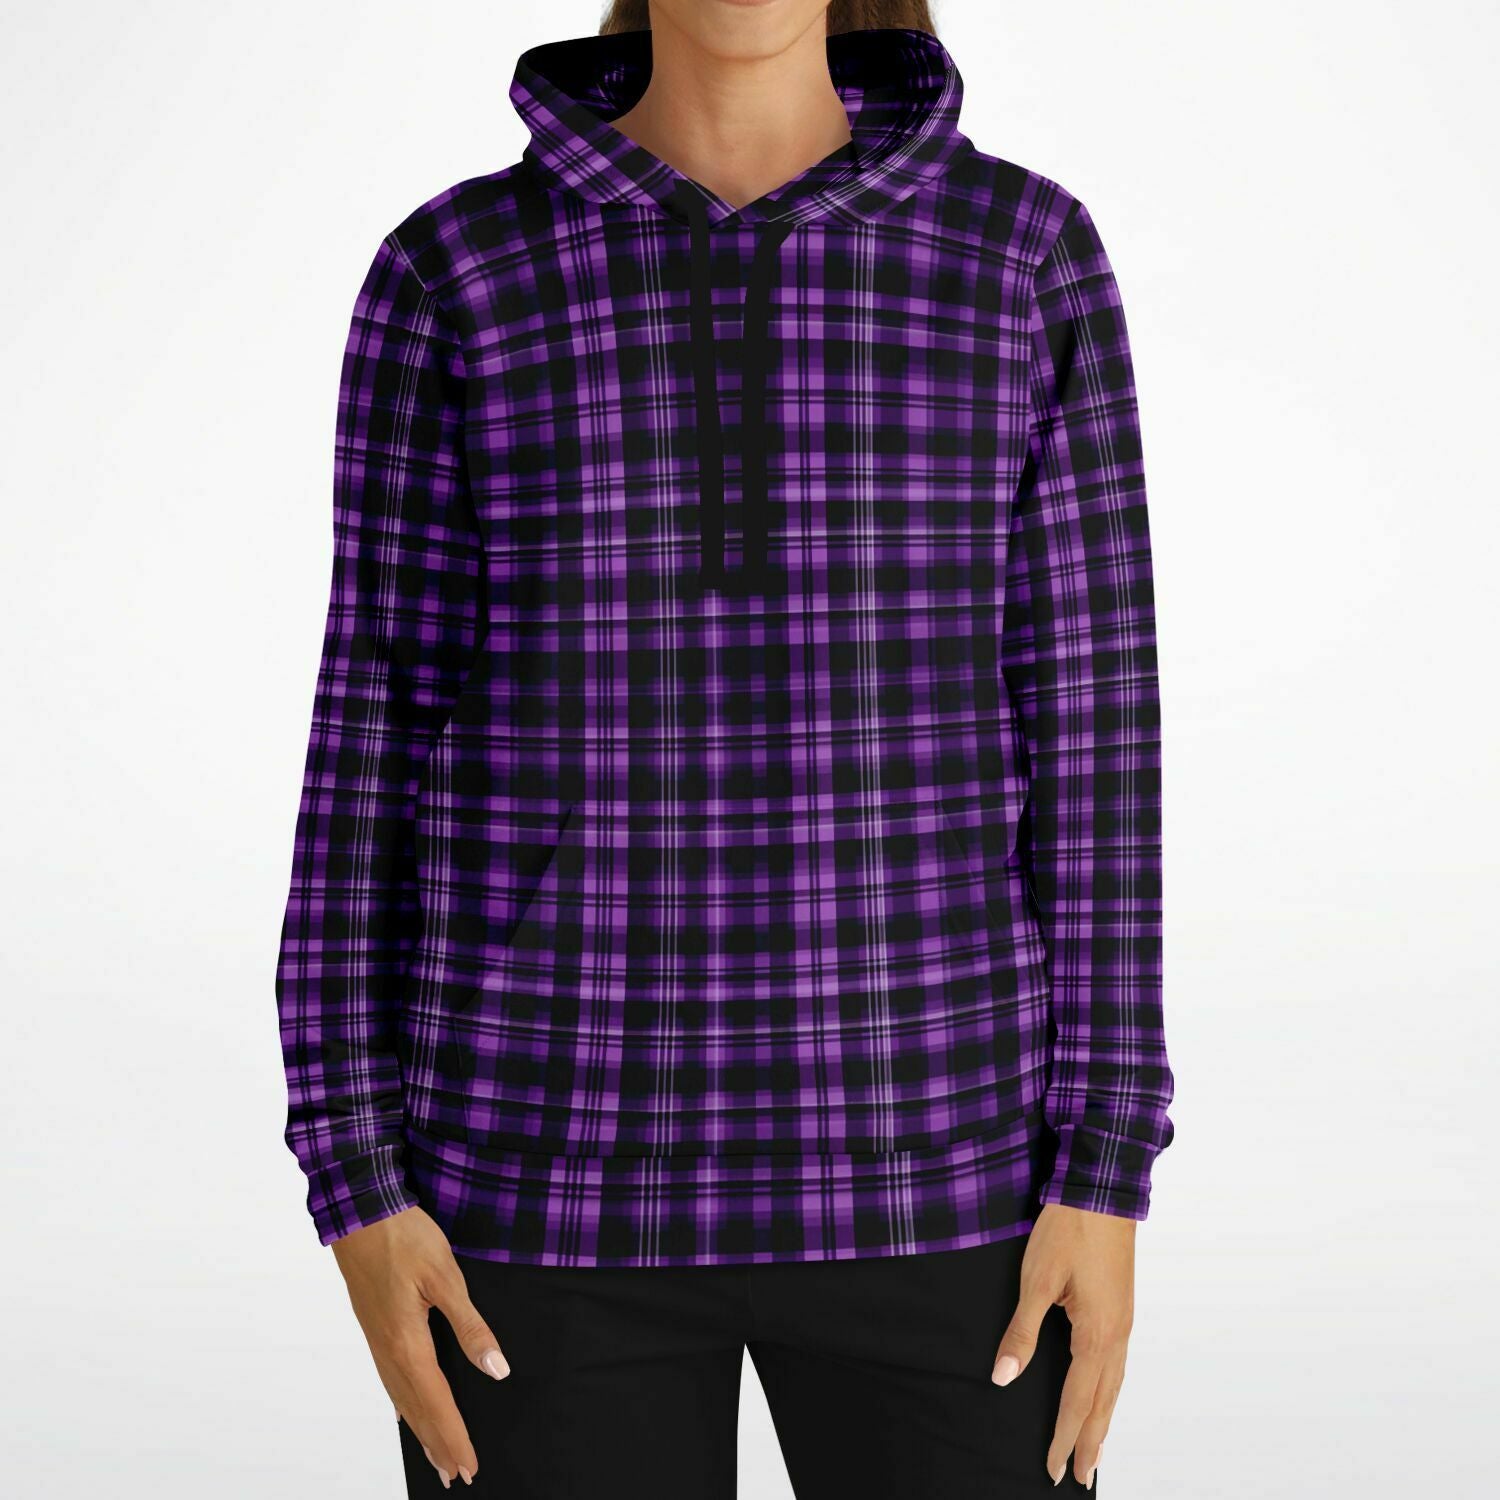 Black and Purple Plaid Hoodie, Tartan Check Pullover Men Women Adult Aesthetic Graphic Cotton Hooded Sweatshirt with Pockets Starcove Fashion